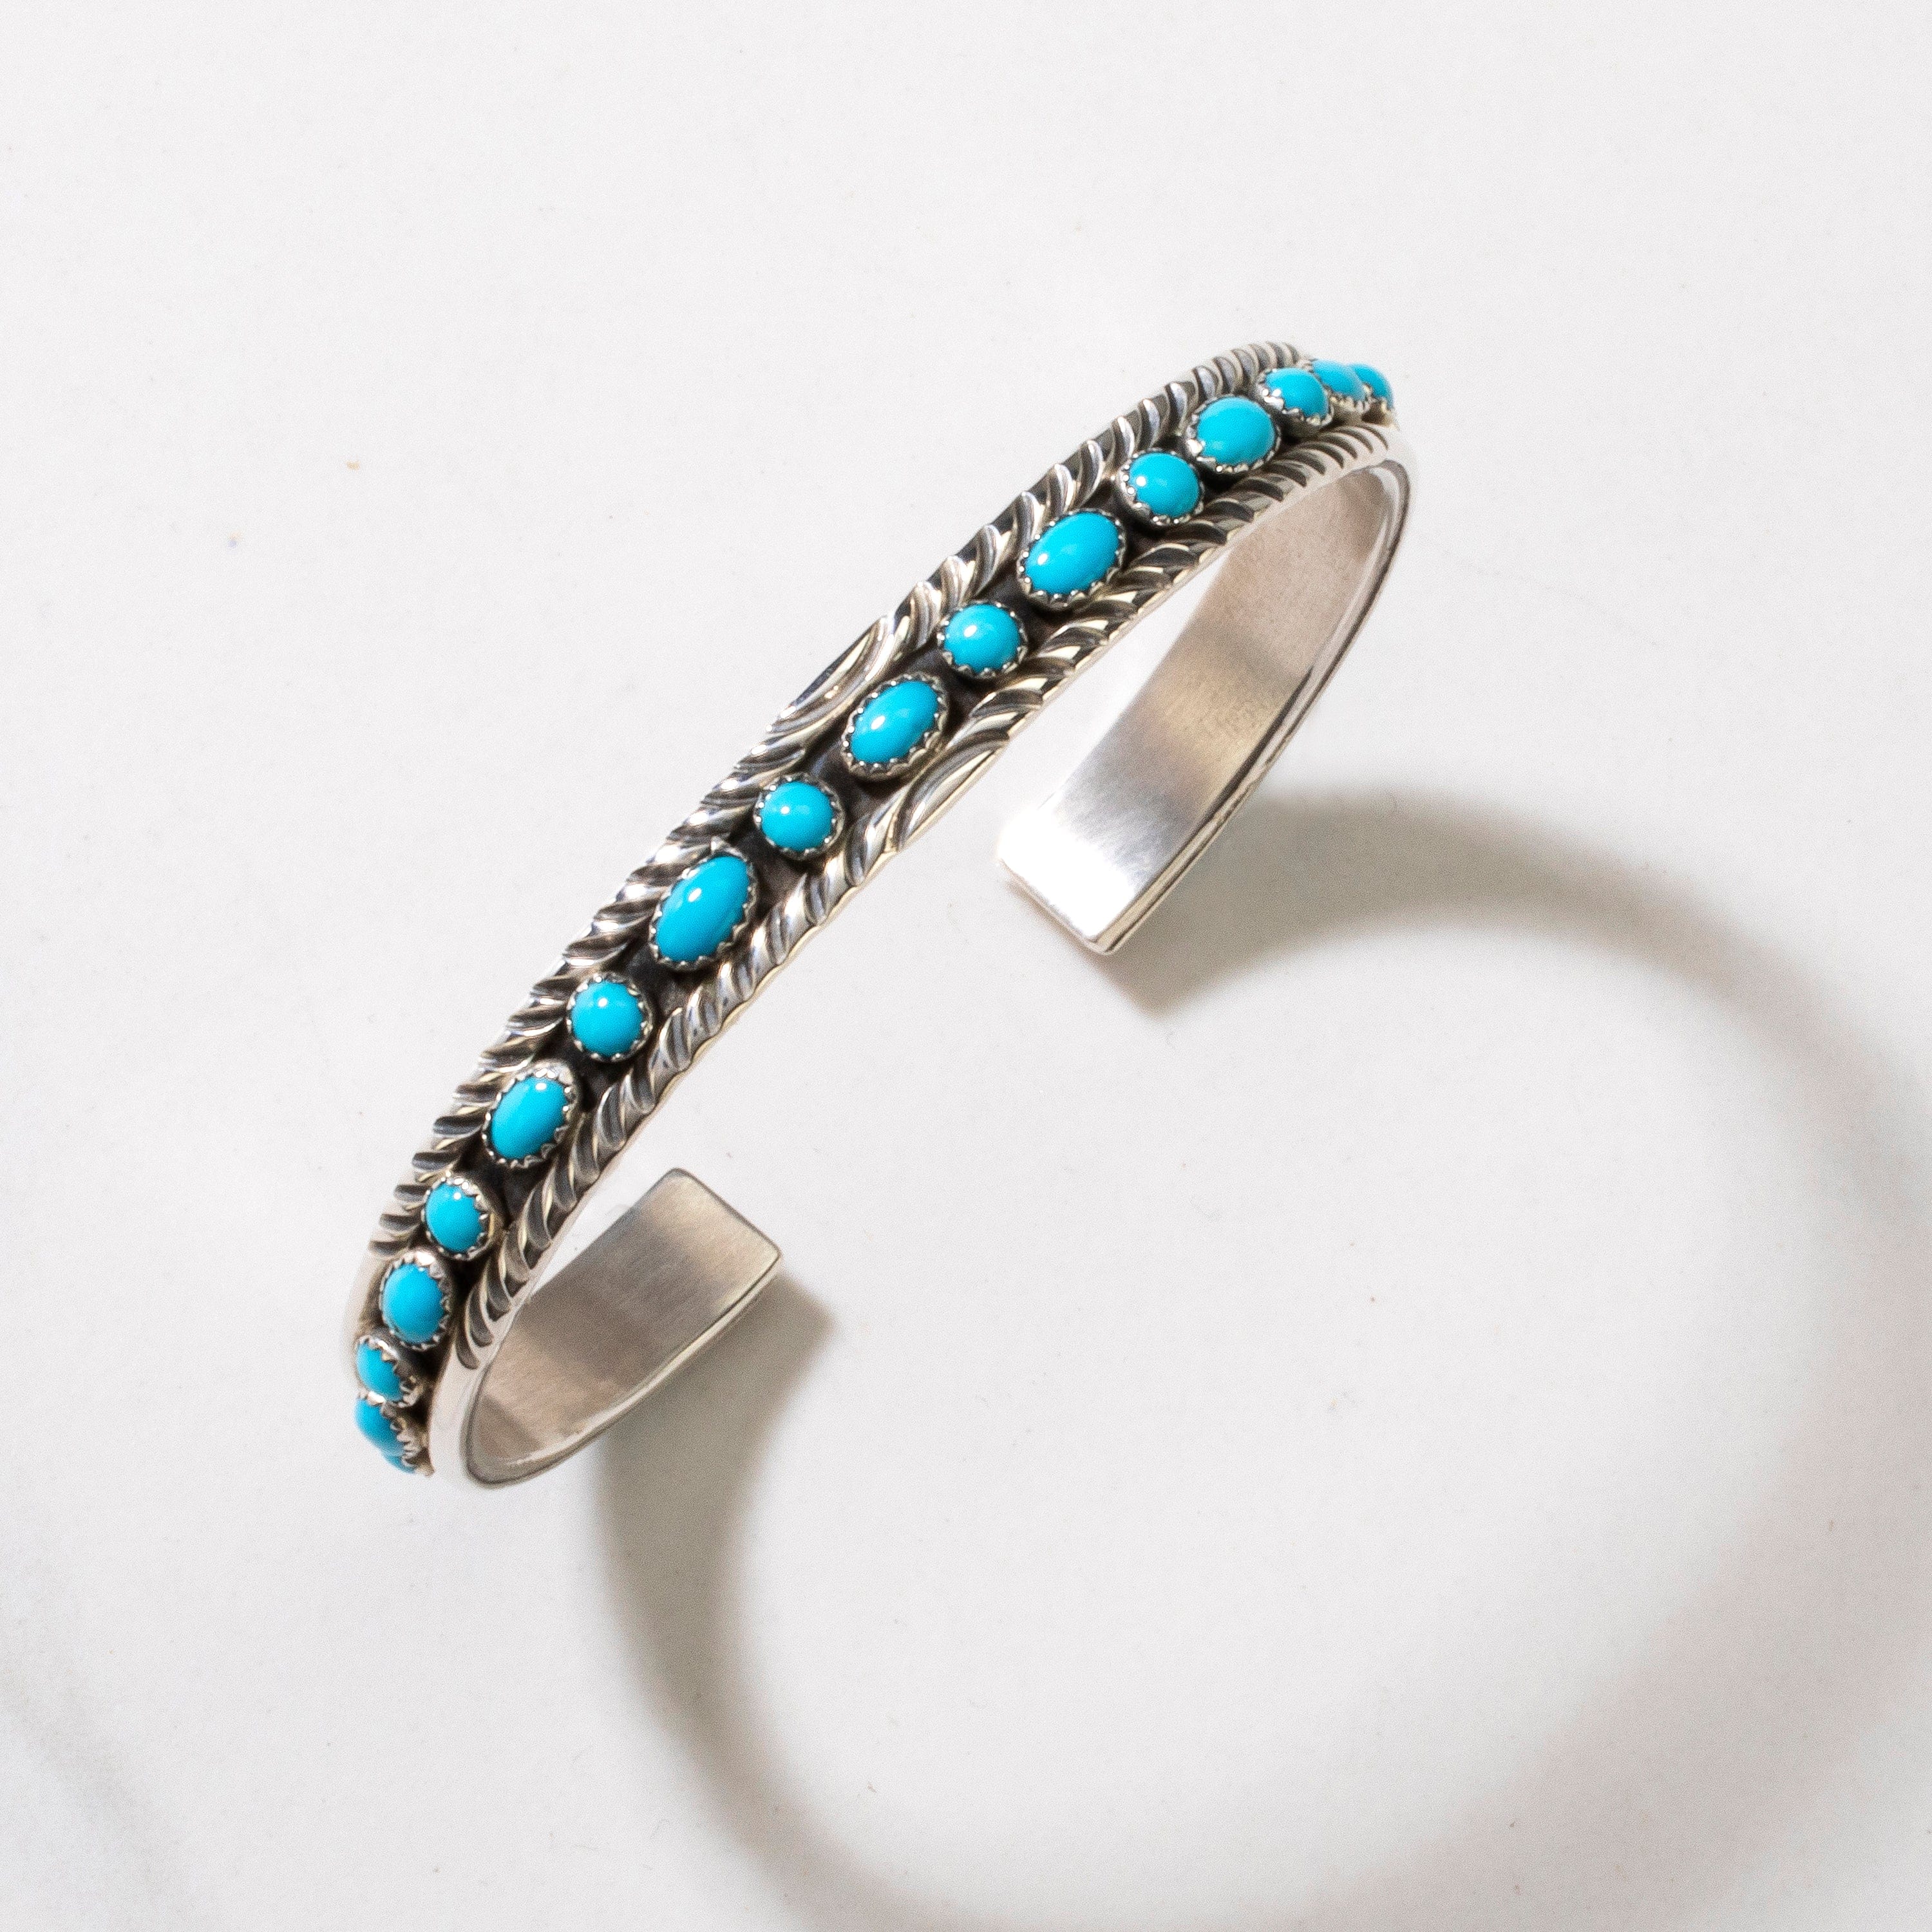 Kalifano Native American Jewelry Patrick Yazzie Navajo Sleeping Beauty Turquoise USA Native American Made 925 Sterling Silver Cuff NAB1200.021